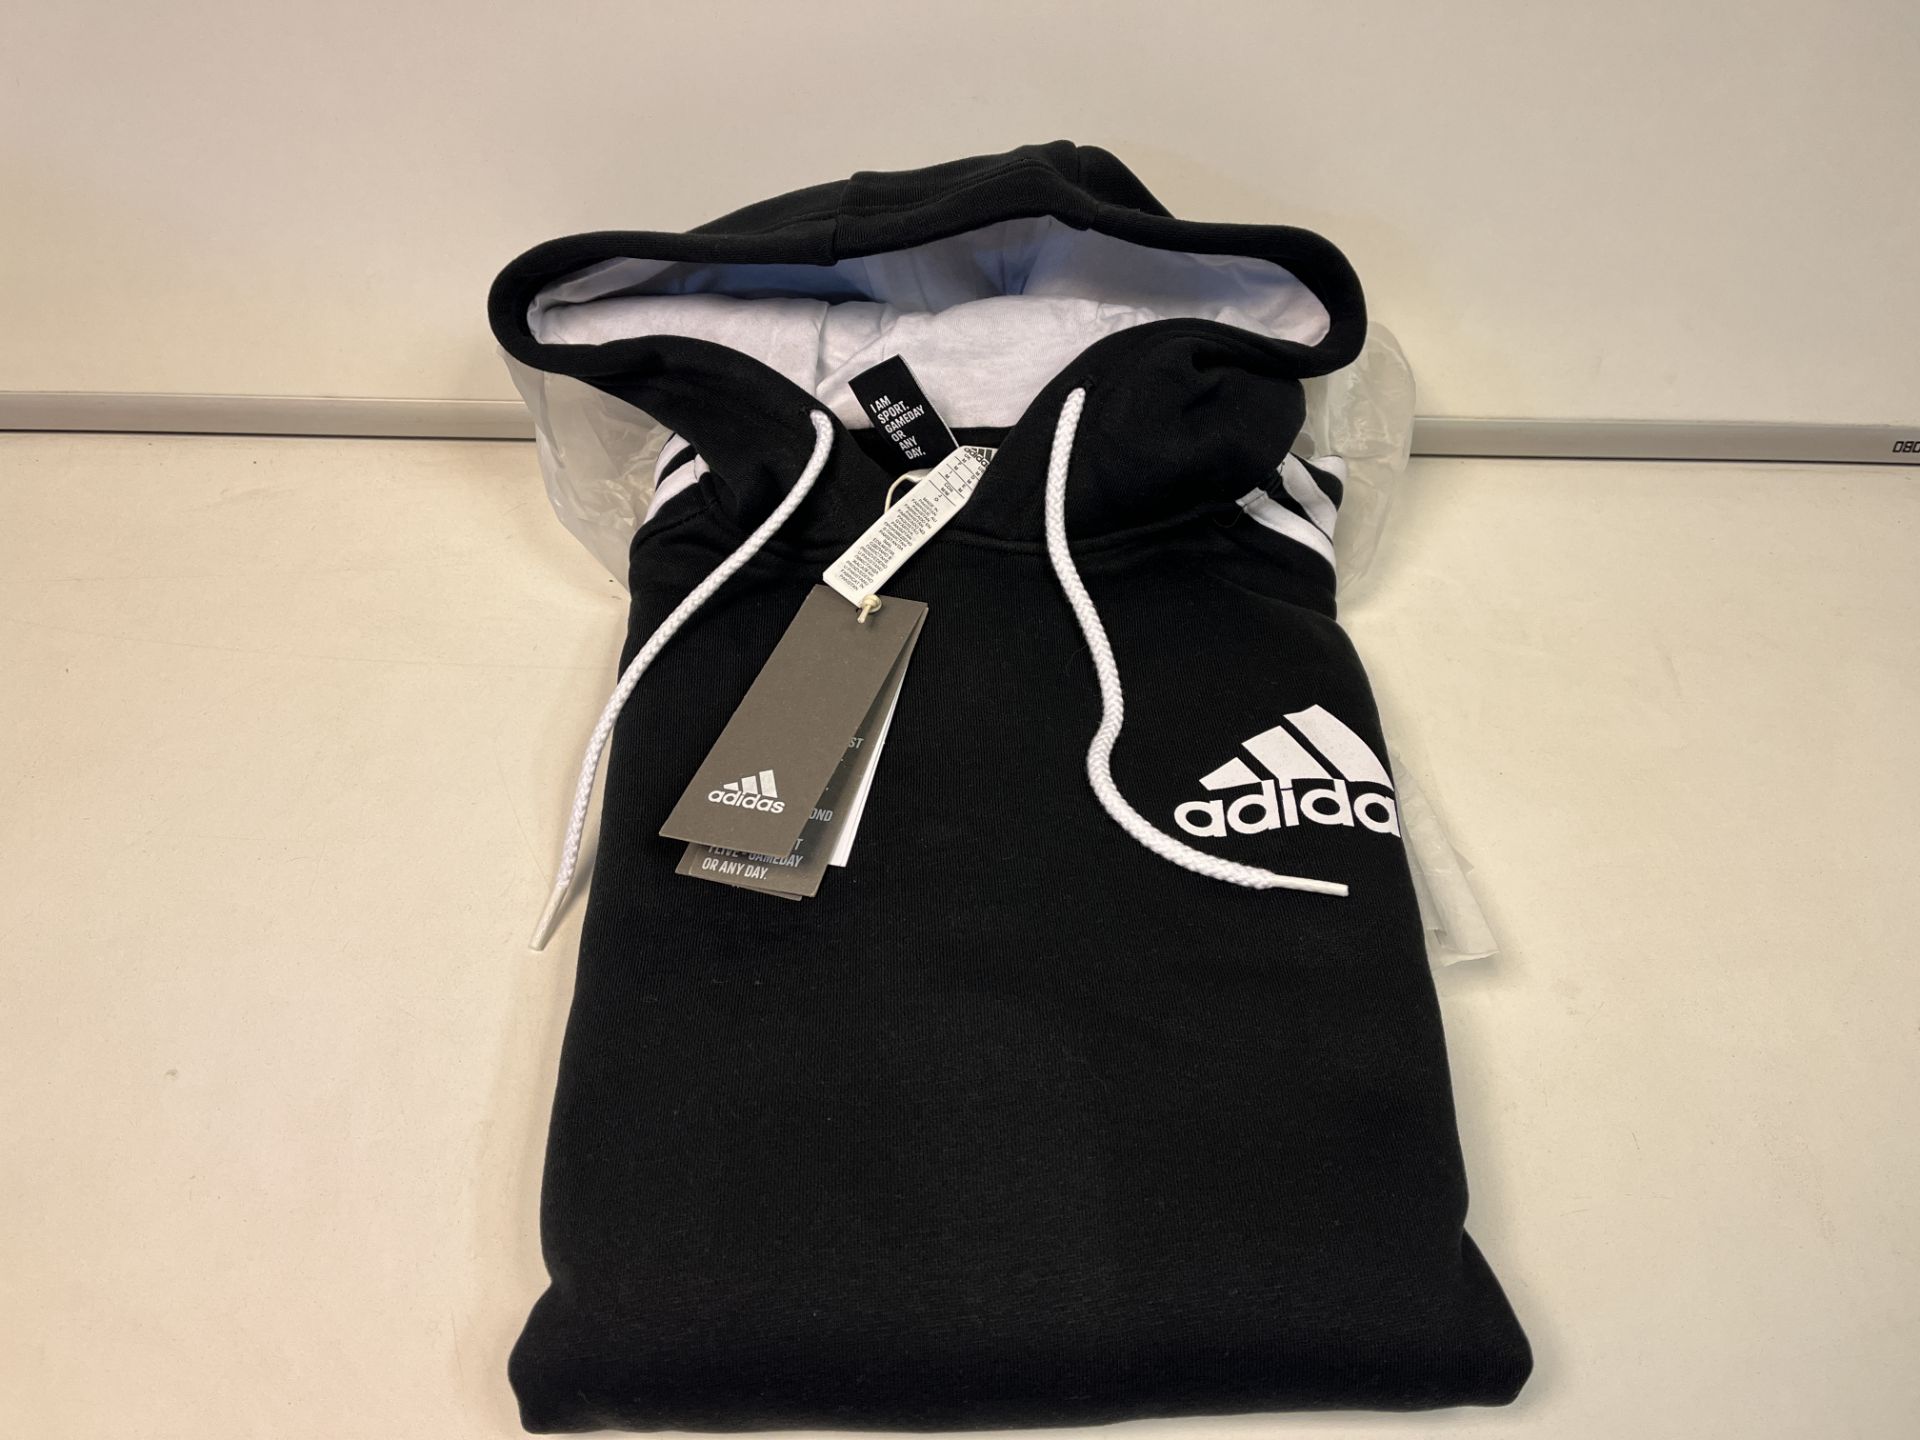 5 X BRAND NEW ADIDAS MENS 3 STRIPES LOGO OVER THE HEAD CASUAL HOODIES LOUNGEWEAR BLACK SIZE SMALL